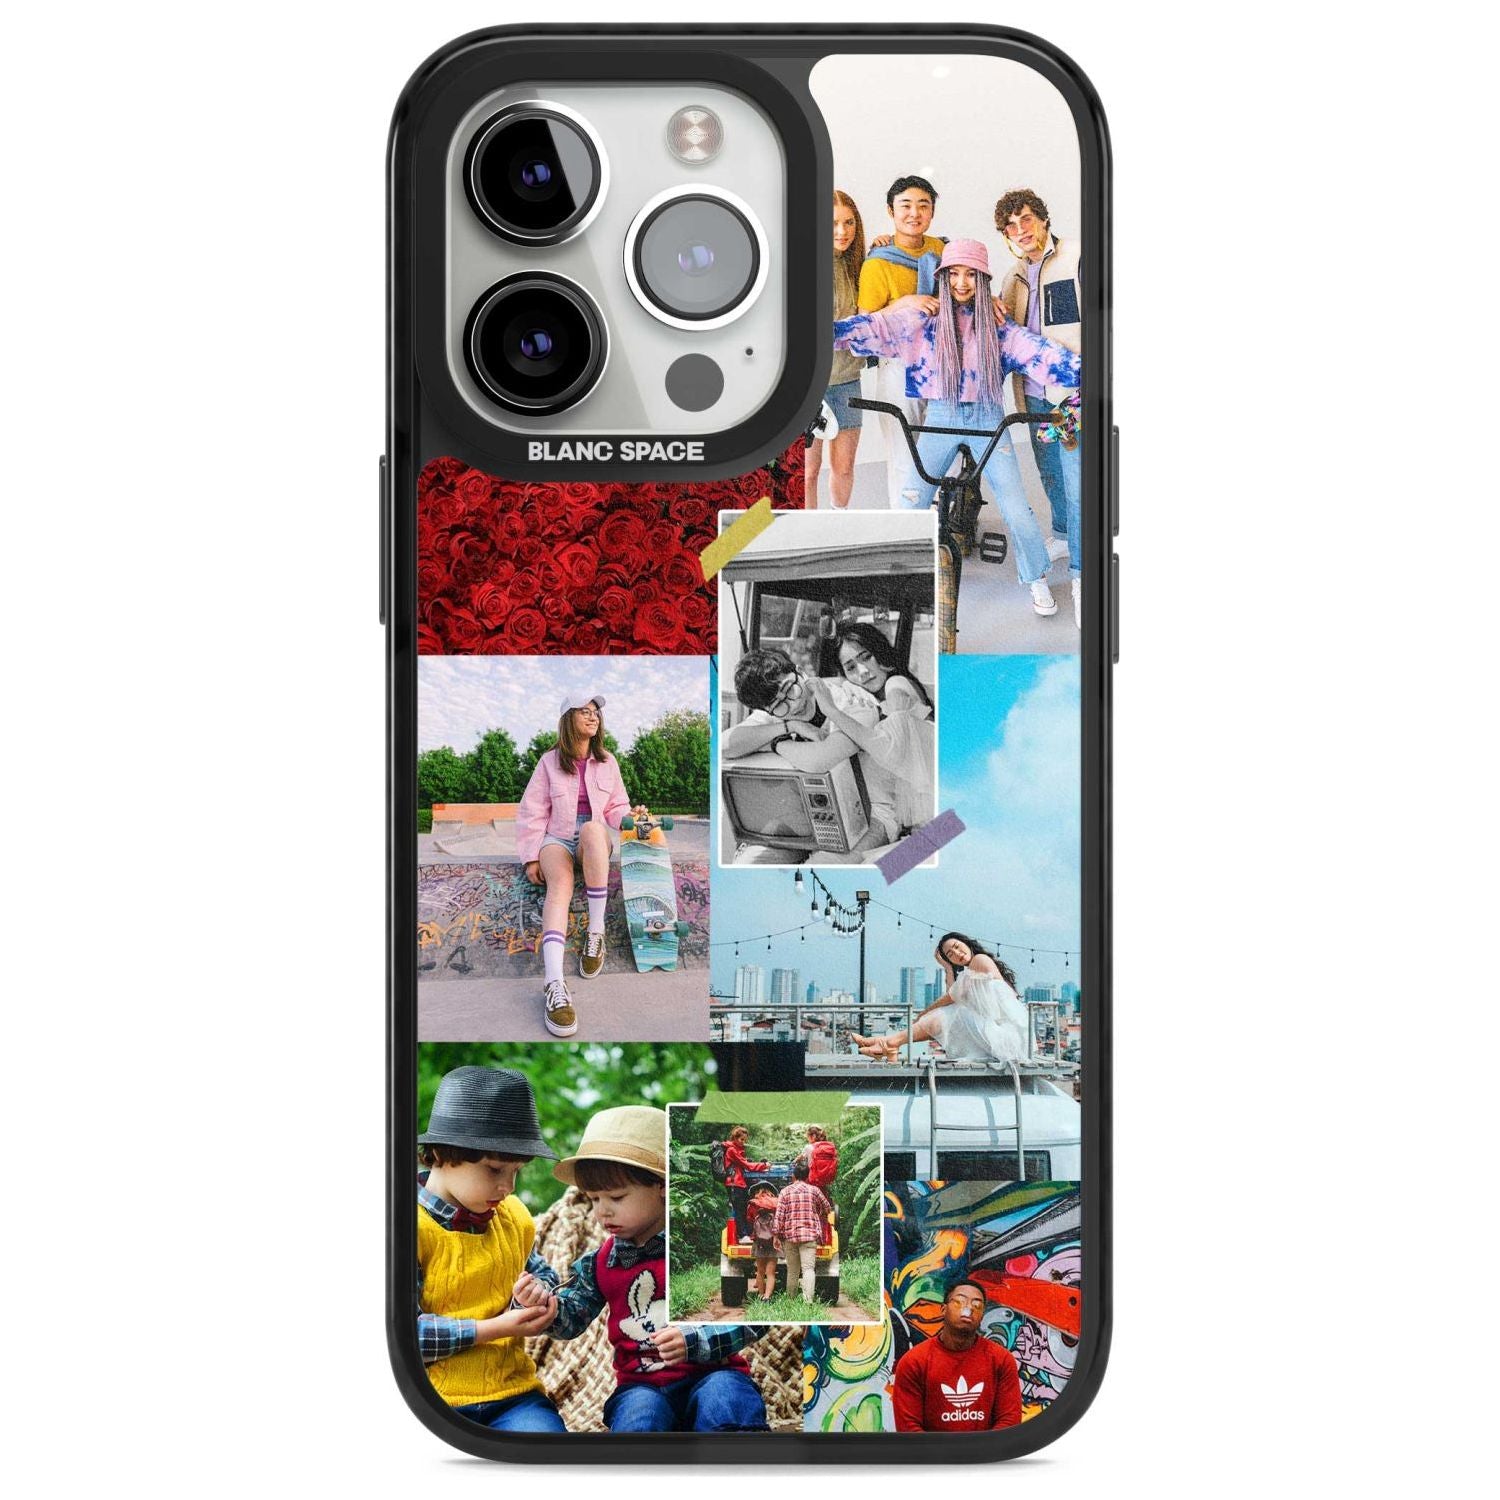 Personalised Photo Collage Custom Phone Case iPhone 15 Pro Max / Magsafe Black Impact Case,iPhone 15 Pro / Magsafe Black Impact Case,iPhone 14 Pro Max / Magsafe Black Impact Case,iPhone 14 Pro / Magsafe Black Impact Case,iPhone 13 Pro / Magsafe Black Impact Case Blanc Space